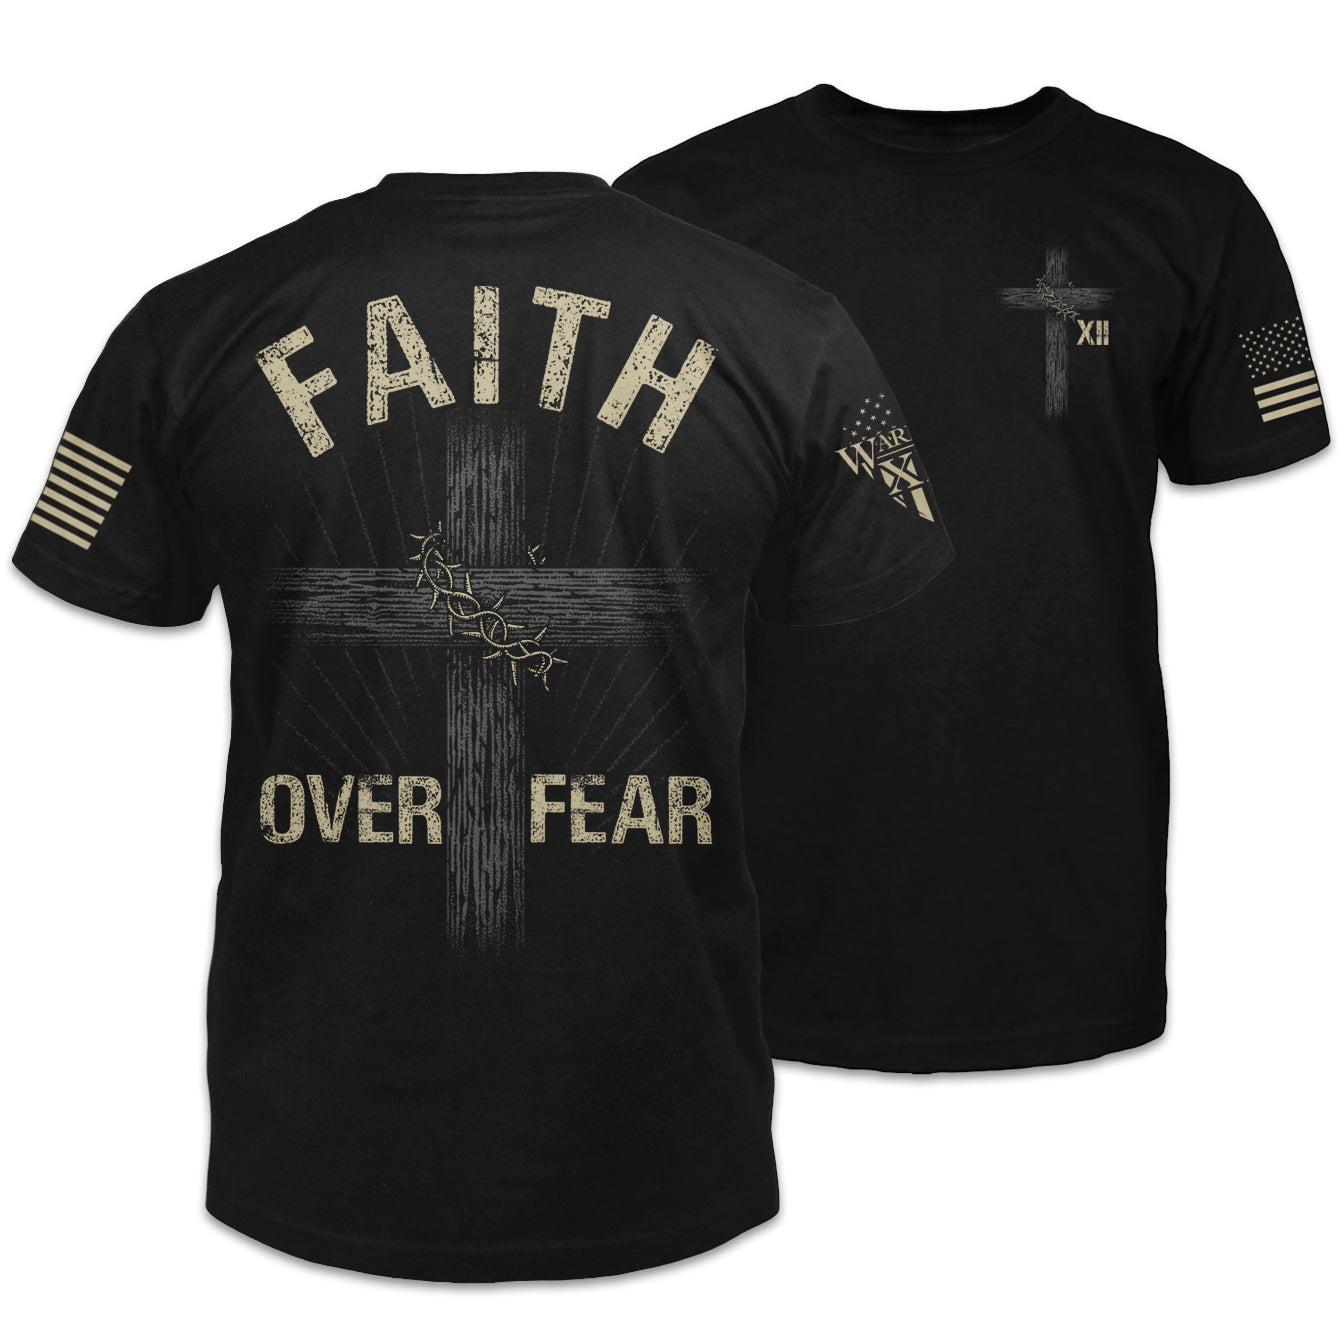 Front & back black t-shirt with the words "Faith Over Fear" with a cross printed on the shirt.